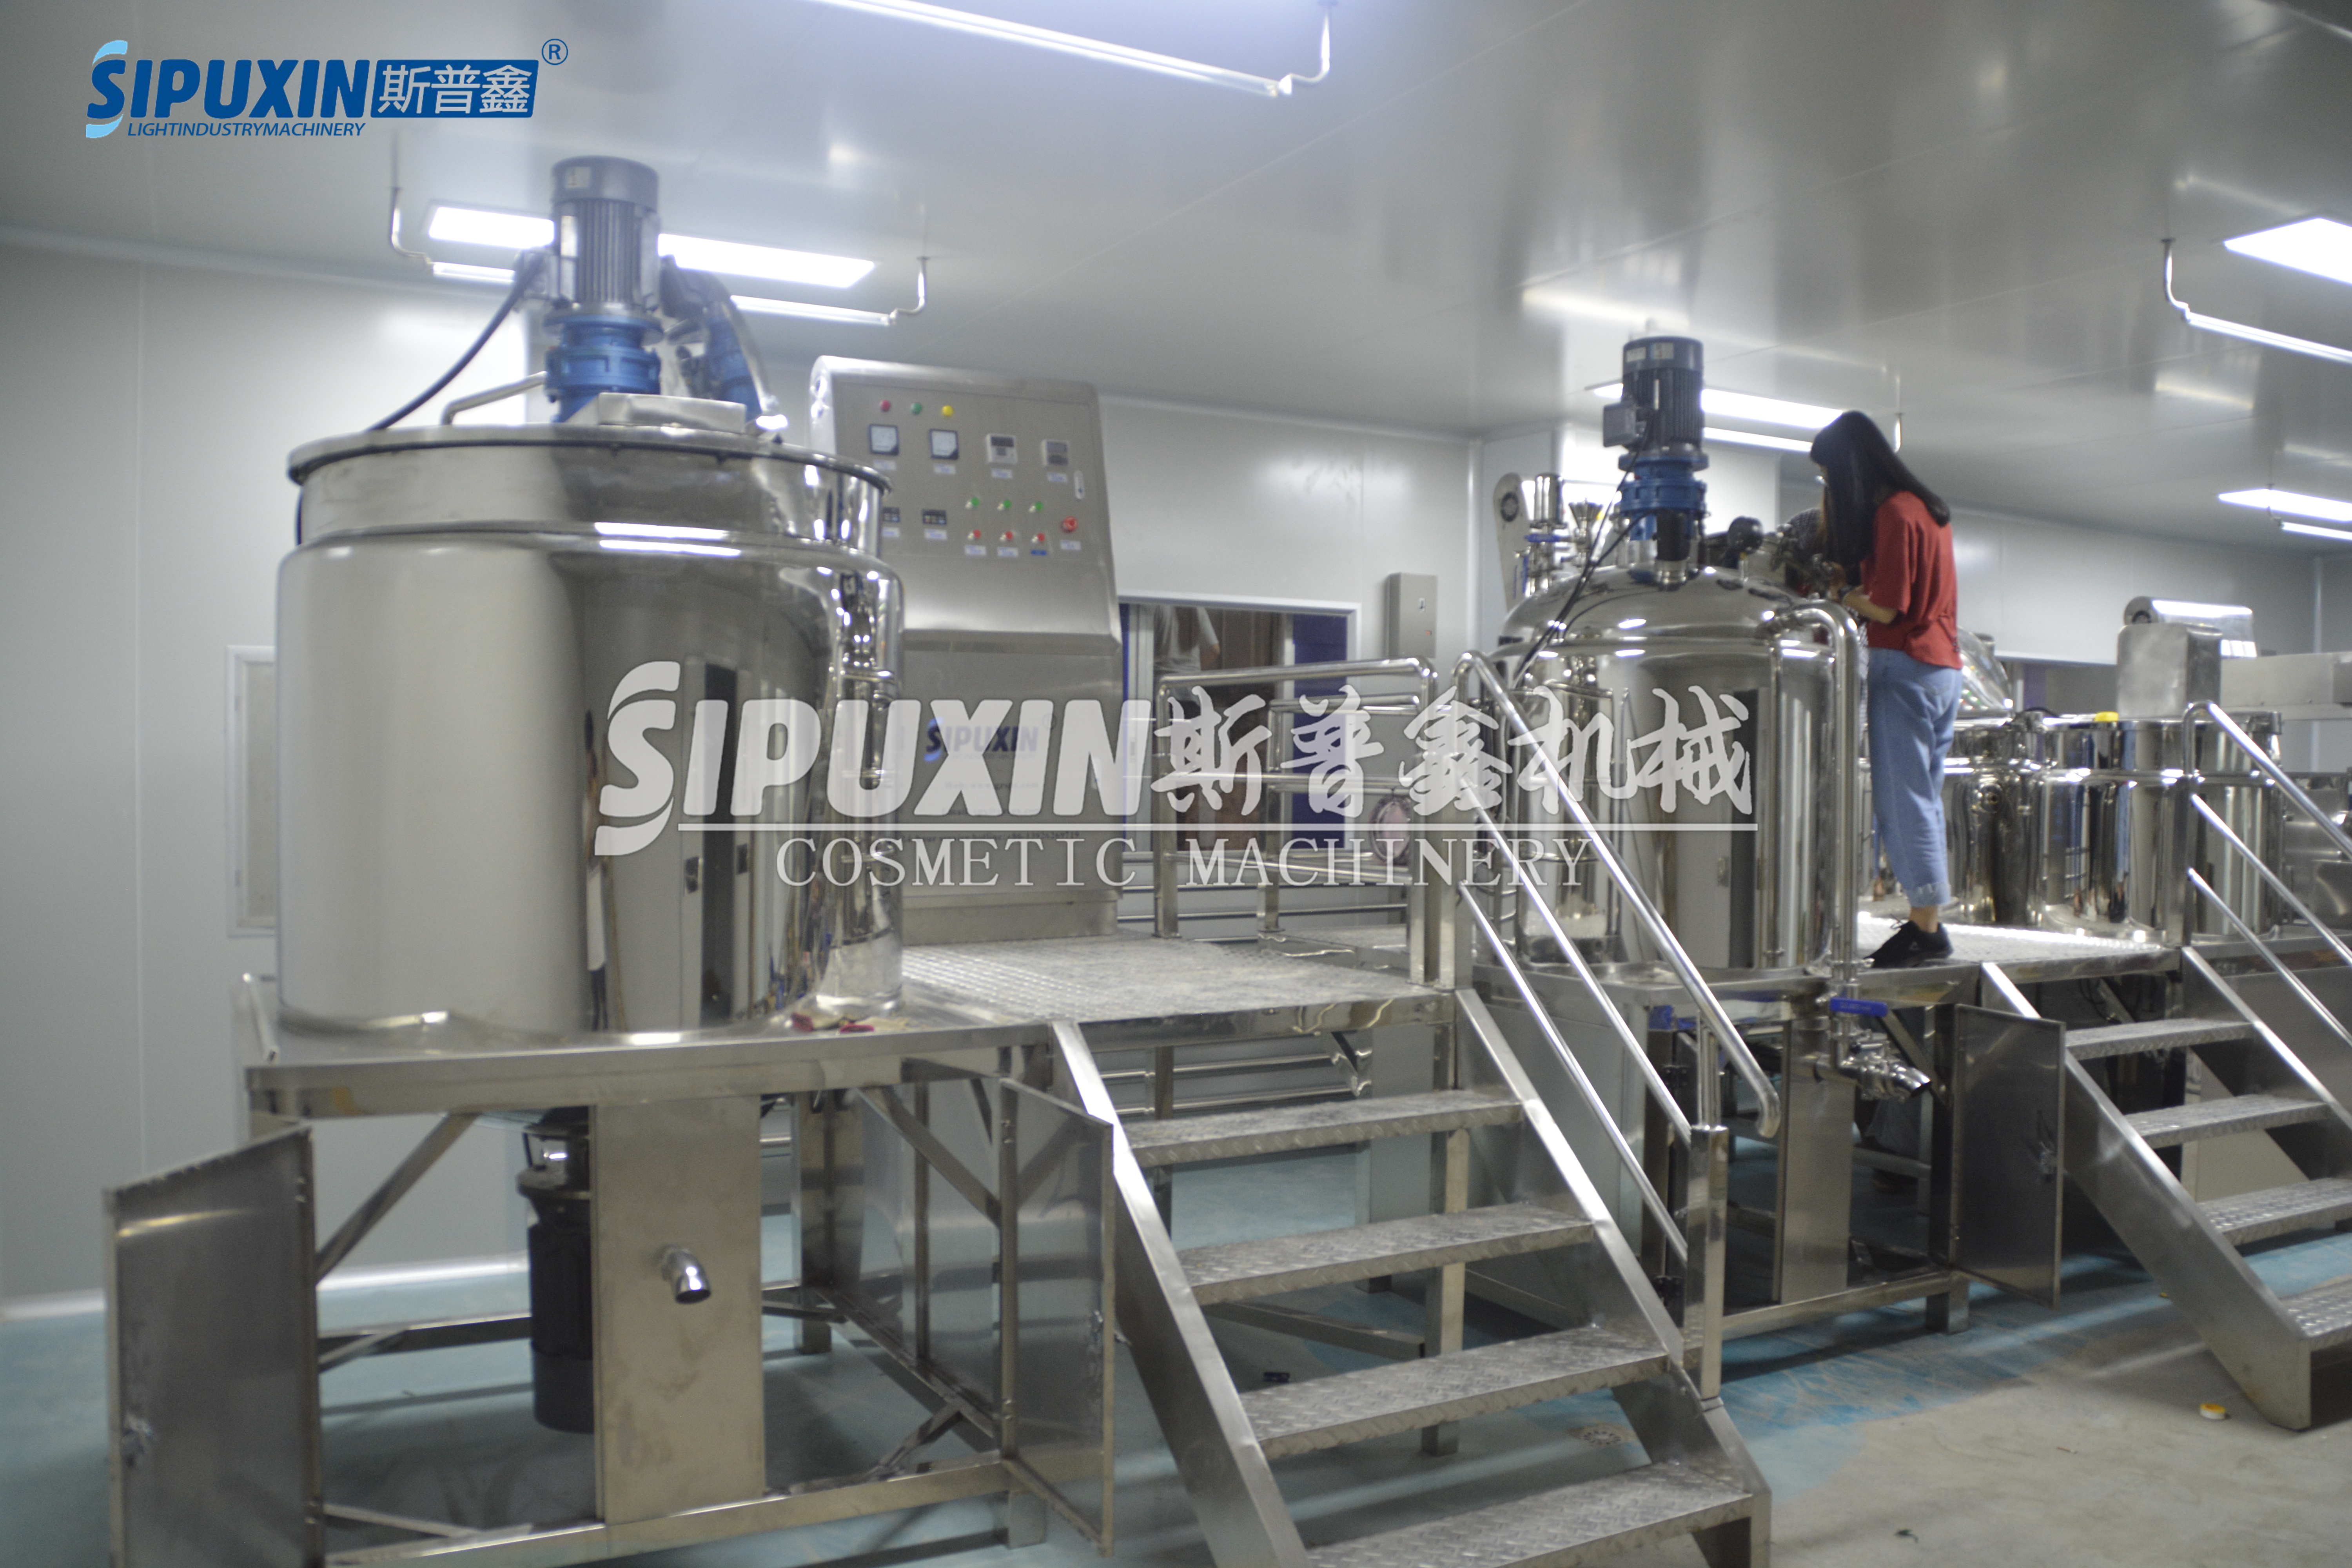 Sipuxin Liquid Detergent Agitator Tank for Cosmetic Daily Chemicals